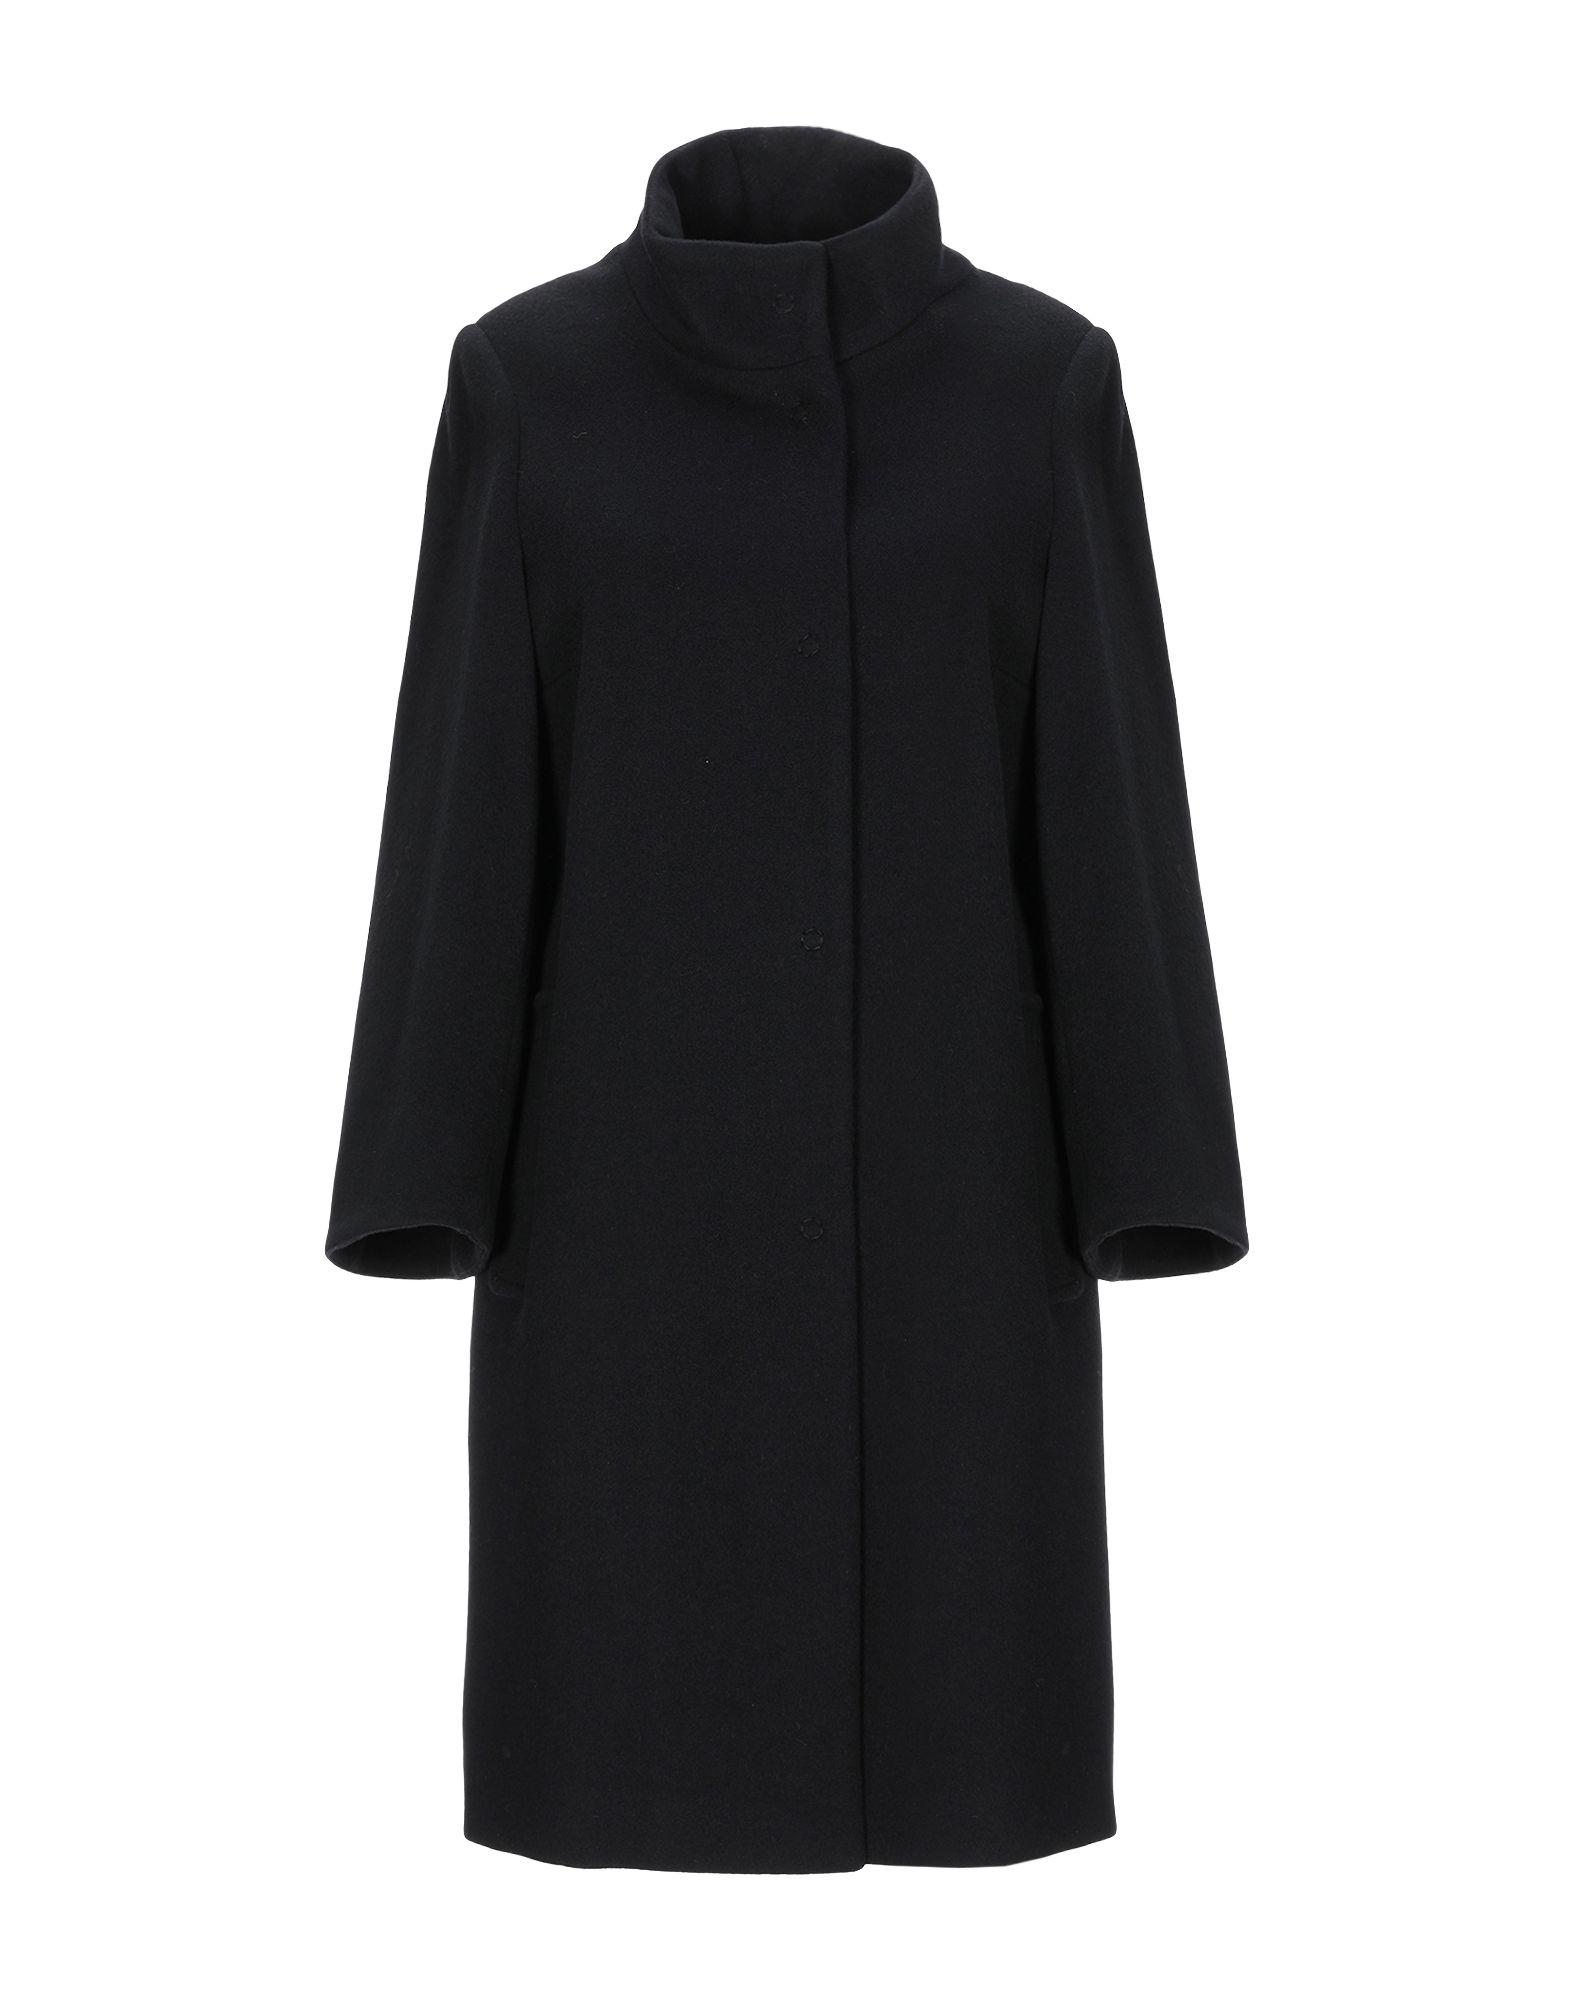 Annie P Synthetic Coat in Black - Lyst